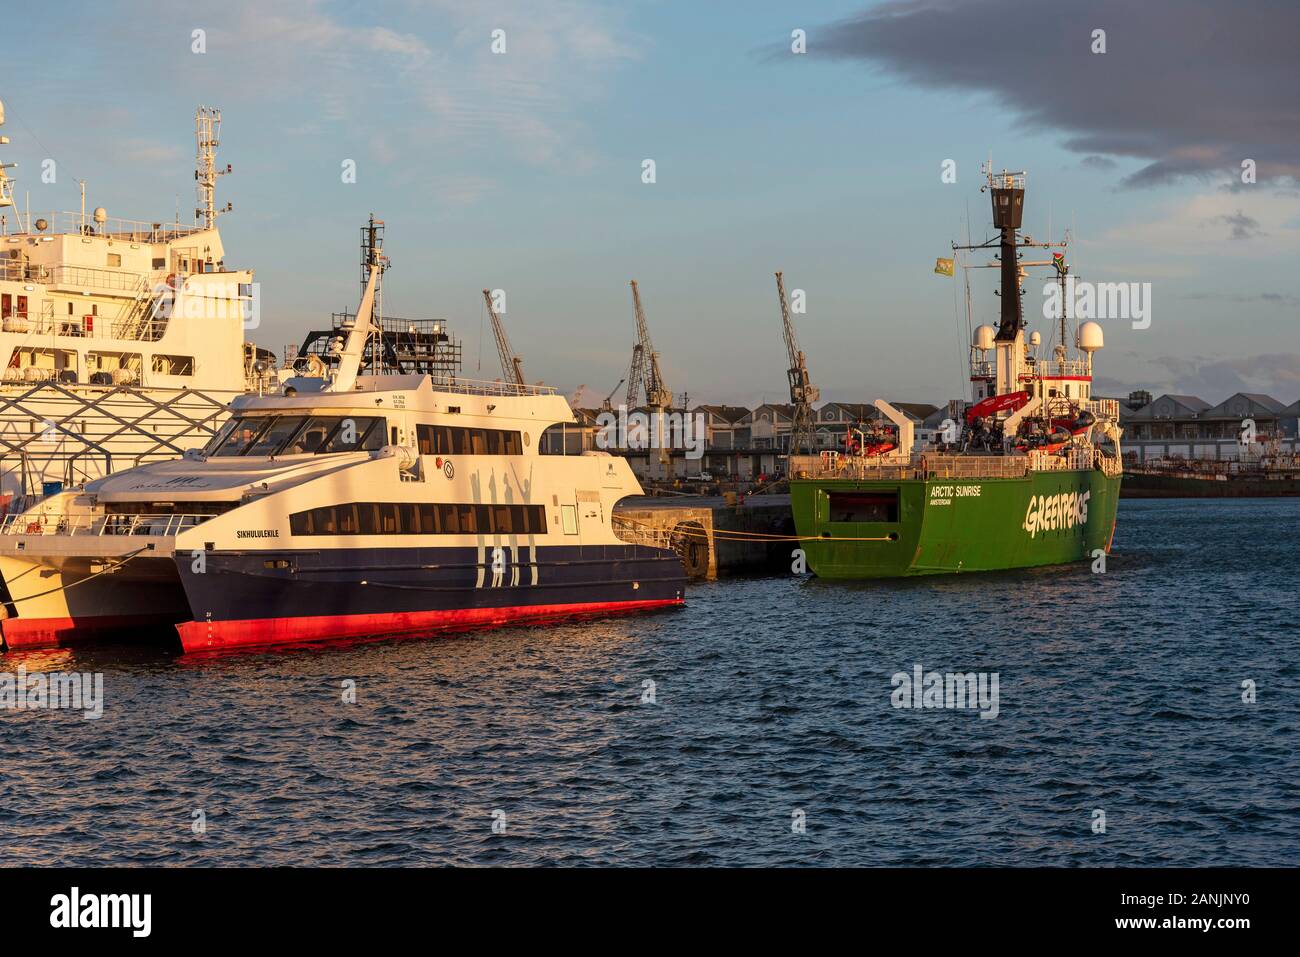 Cape Town South Africa. December 2019. The Greenpeace vessel Artic Sunrise & Robin Island ferry, Sikhululekile in Cape Town harbour. Stock Photo